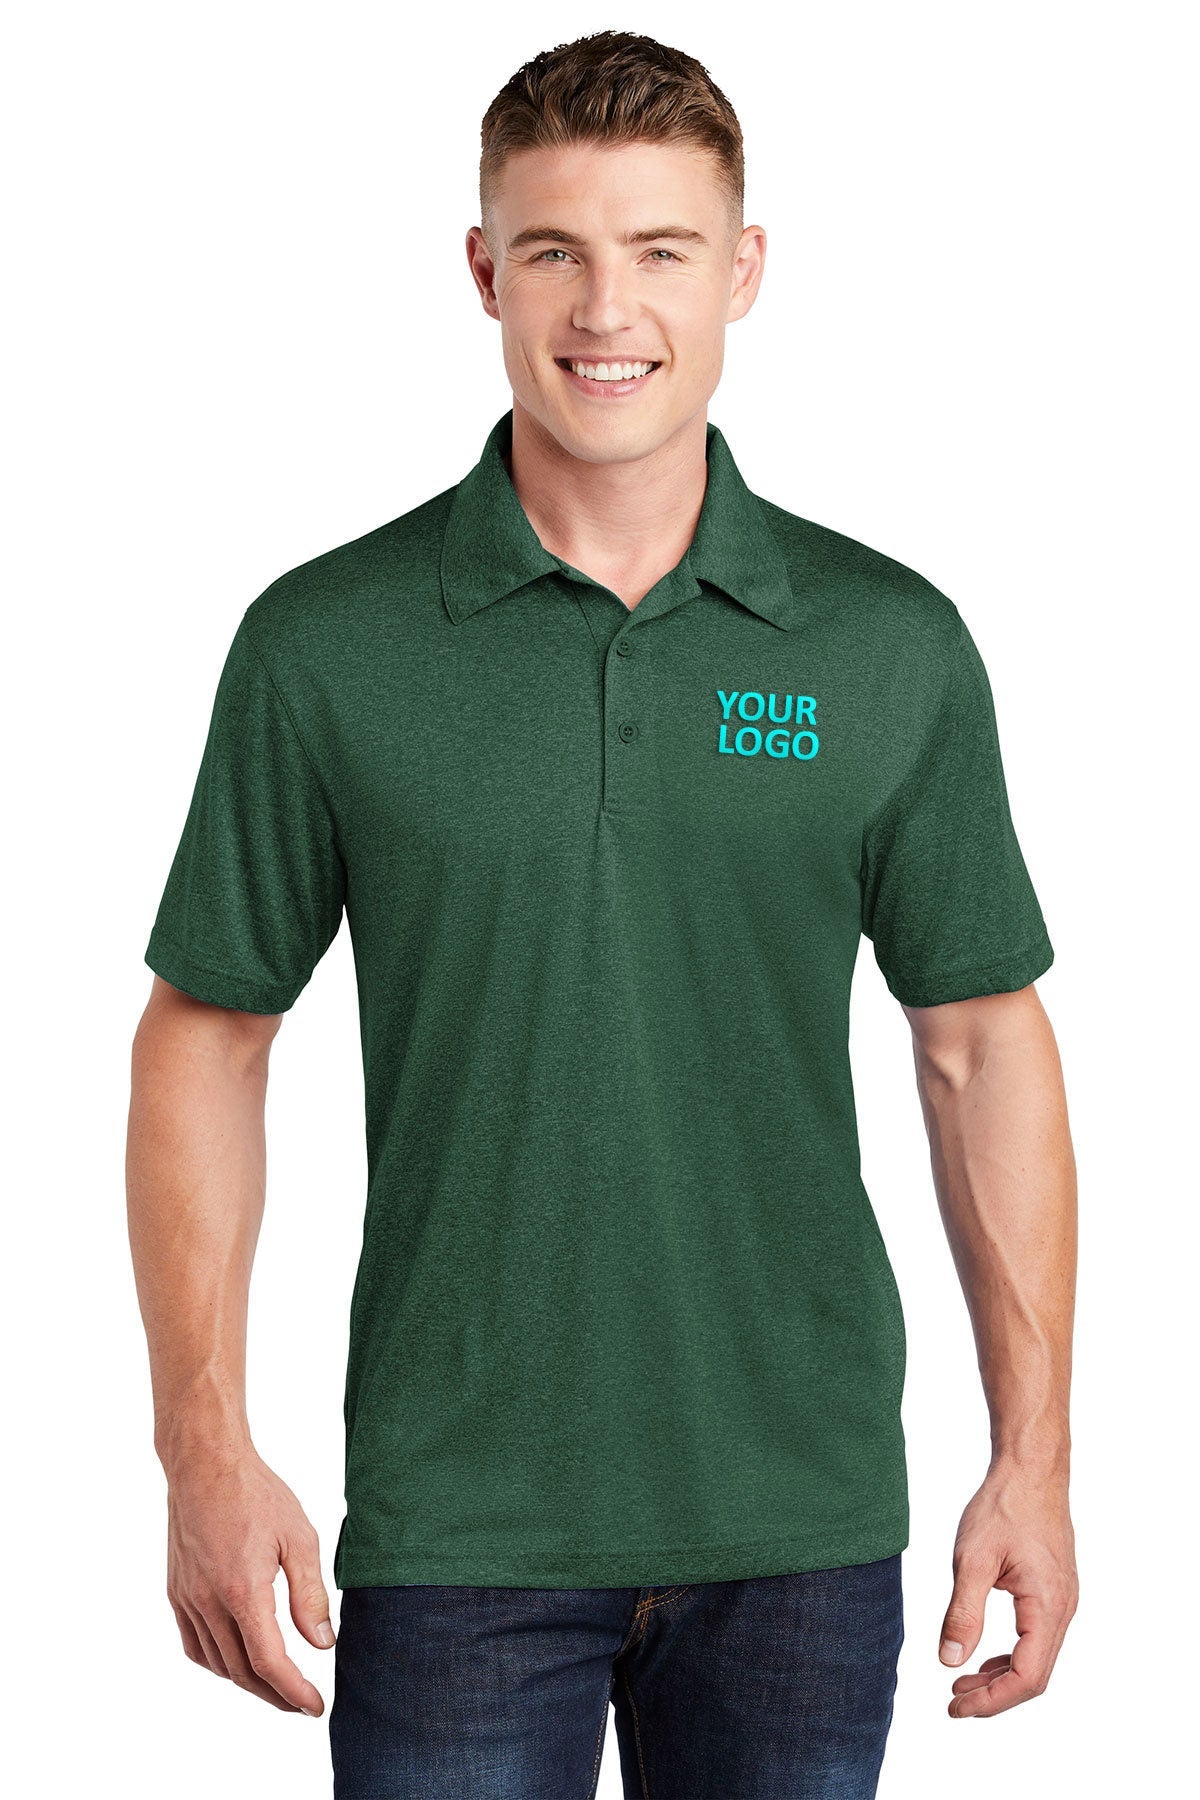 Sport-Tek Forest Green Heather ST660 polo work shirts with company logo